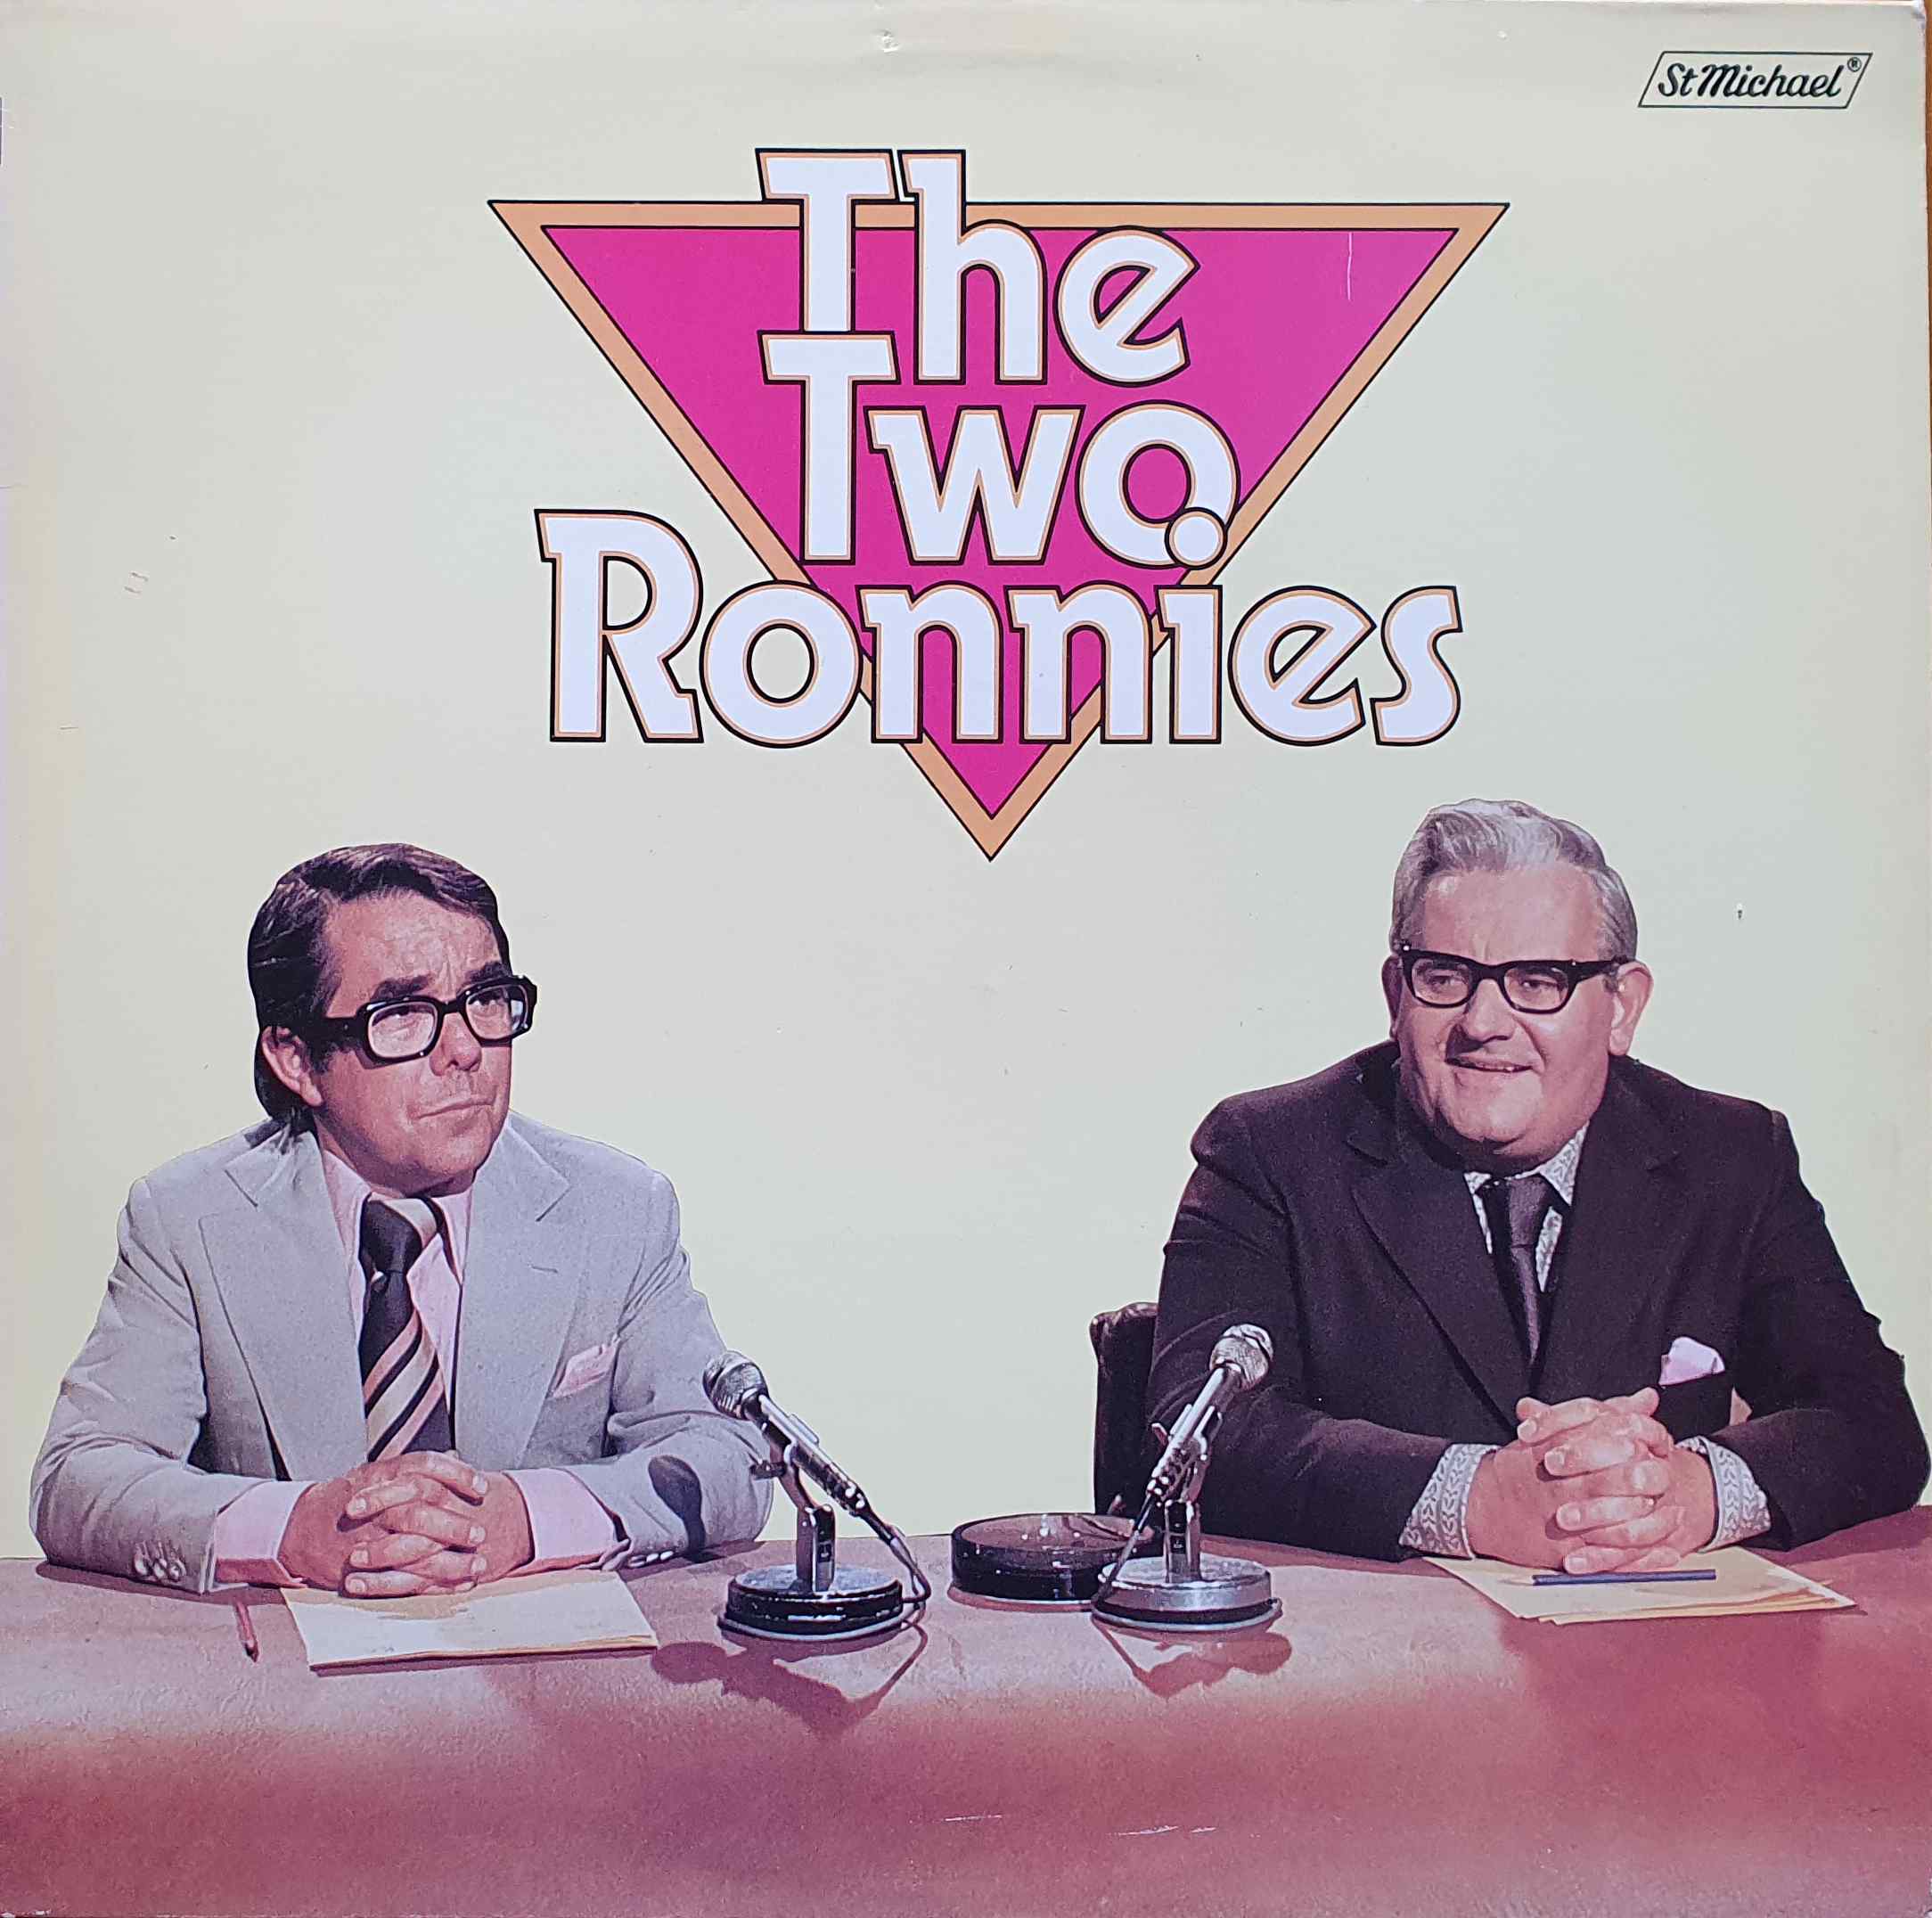 Picture of 2172 0501 The two Ronnies by artist Ronnie Barker / Ronnie Corbett from the BBC records and Tapes library